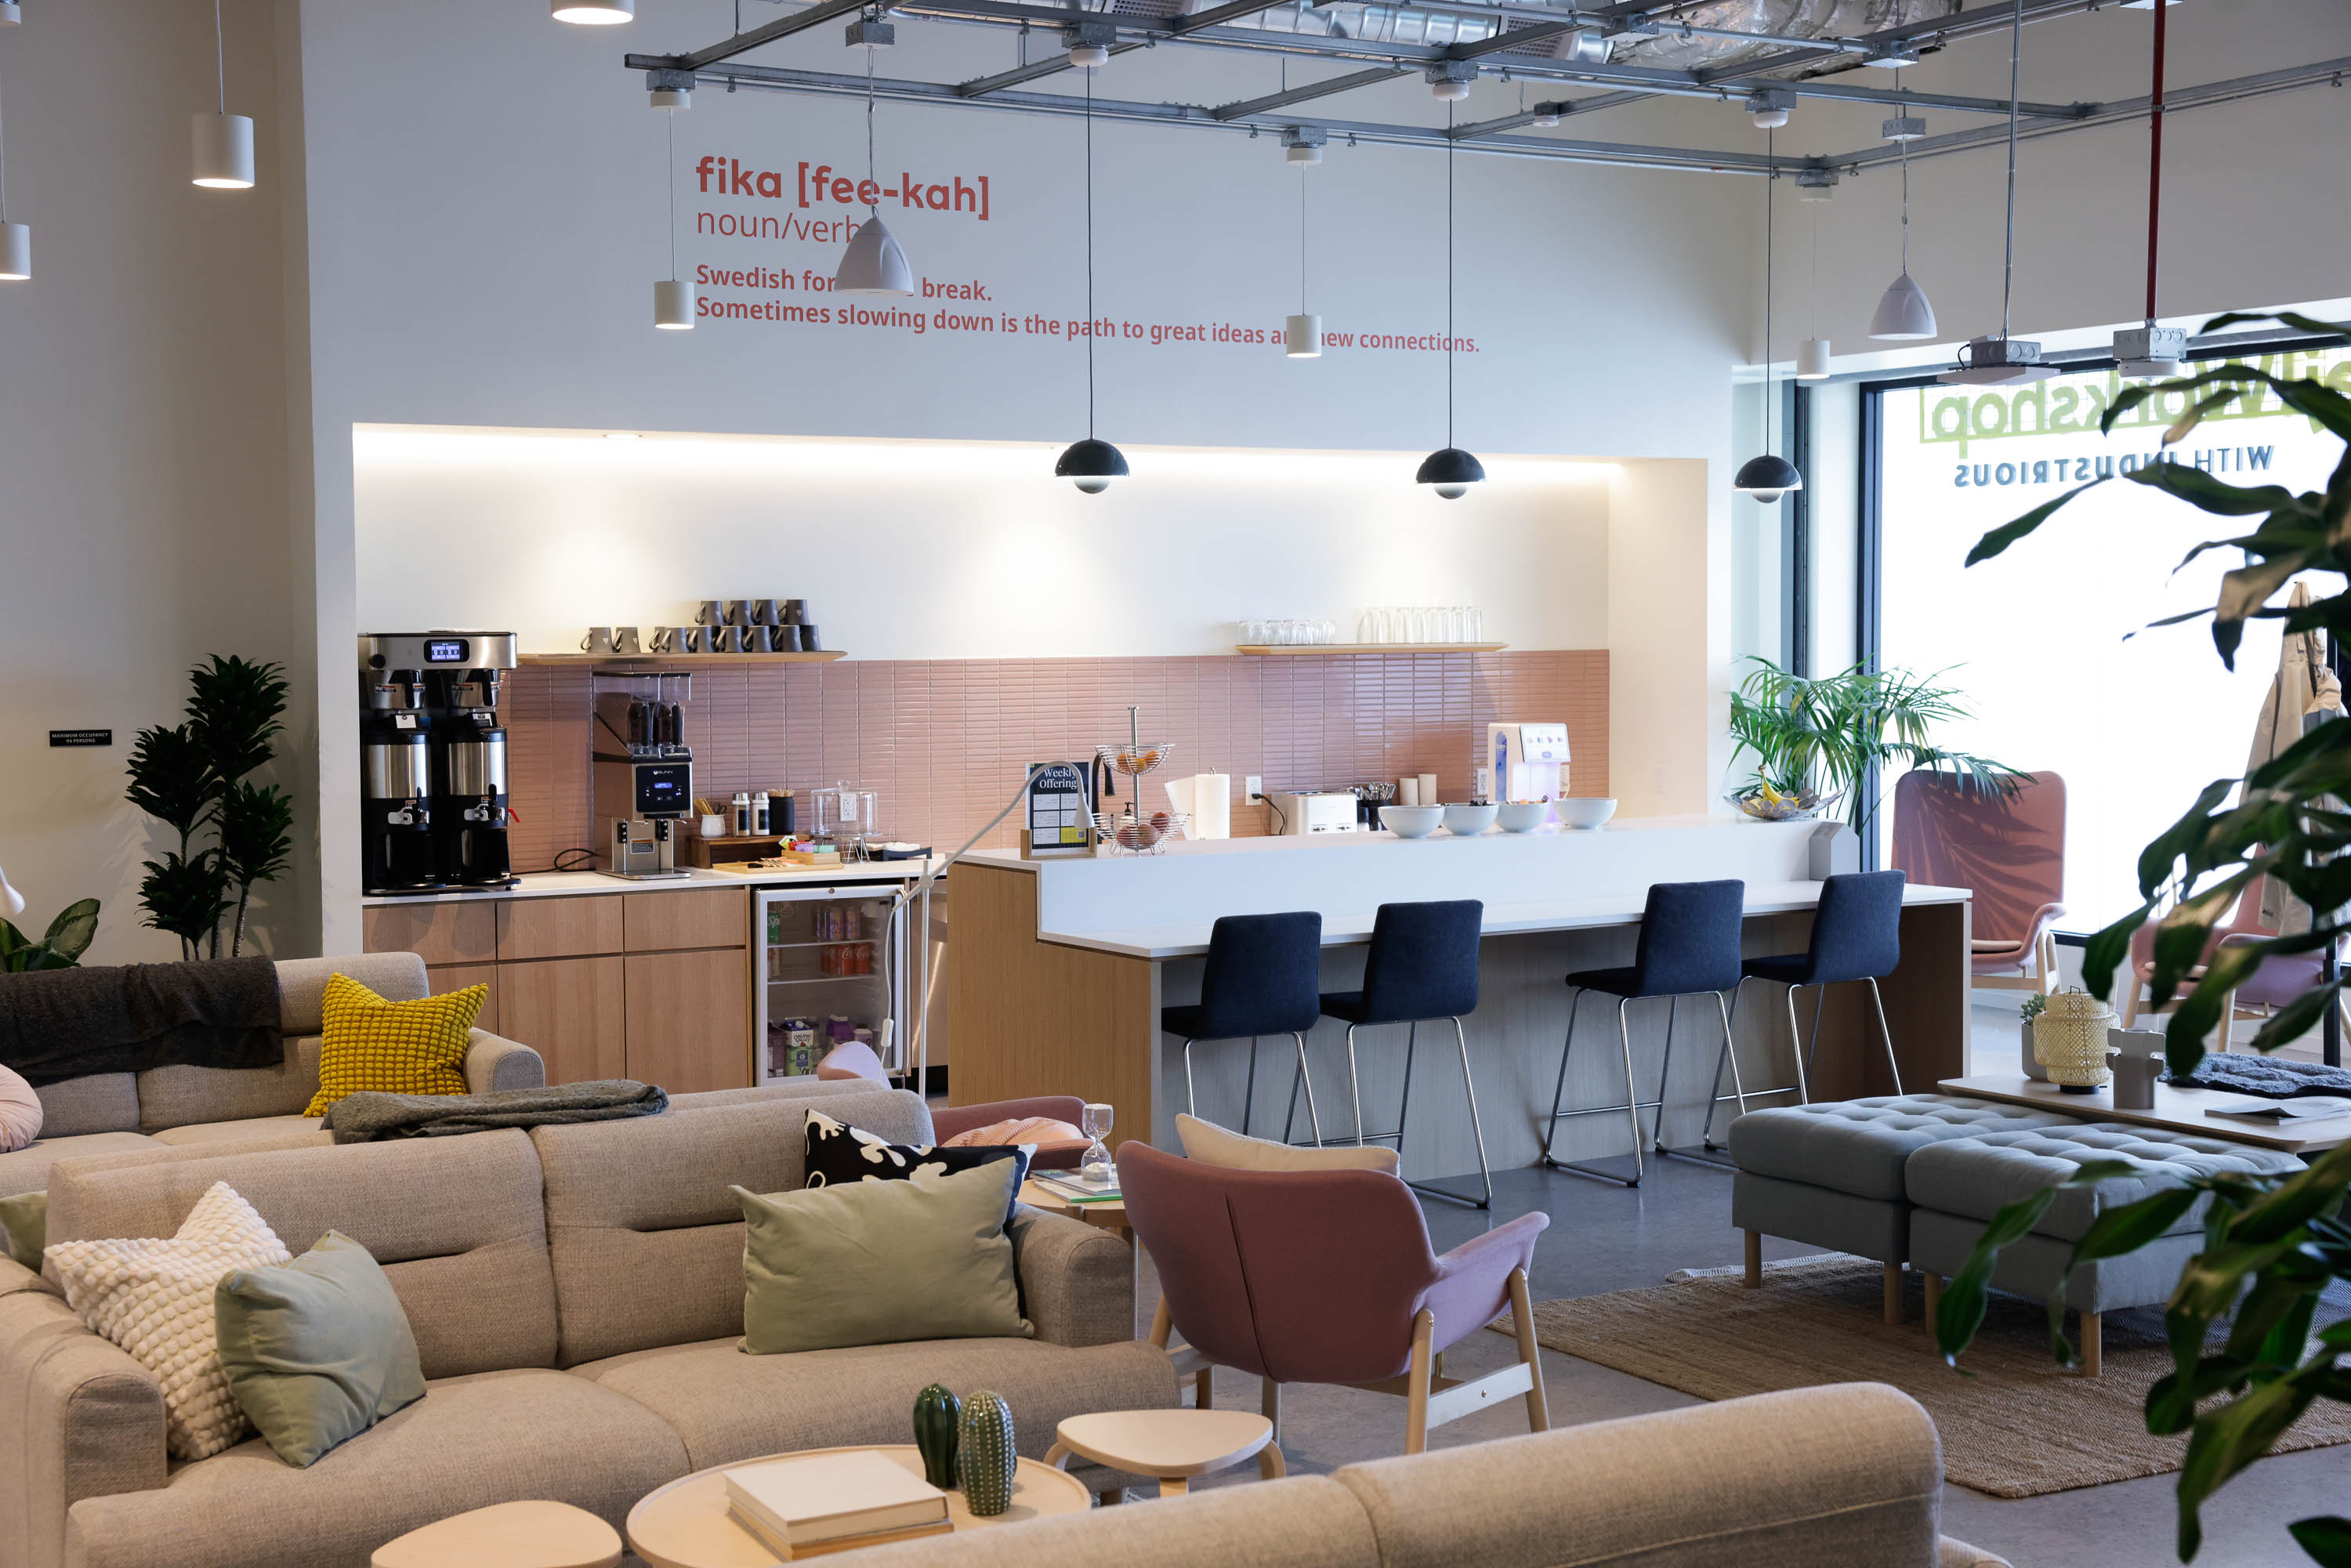 A cozy lounge with sofas, chairs, and a coffee station, designed for breaks and socializing.